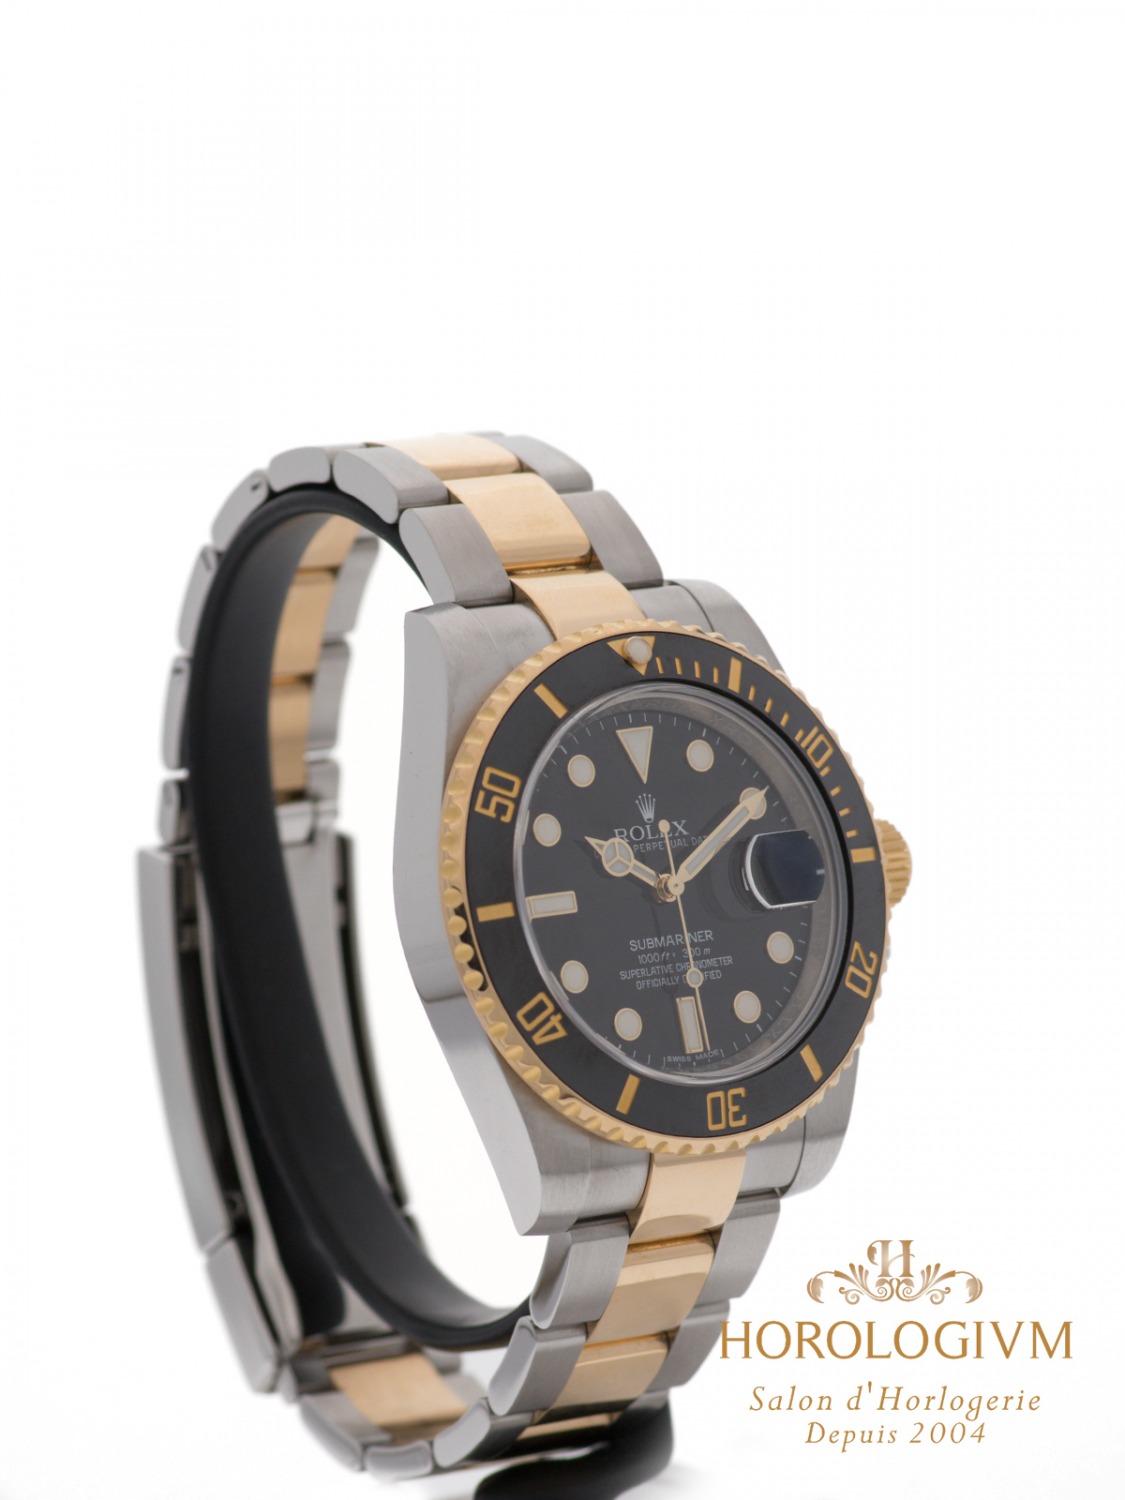 Rolex Submariner Date Two-Tone 40MM Ref. 116613LN watch, two - tone (bi - colored) silver (case) and yellow gold & black ceramic (bezel)